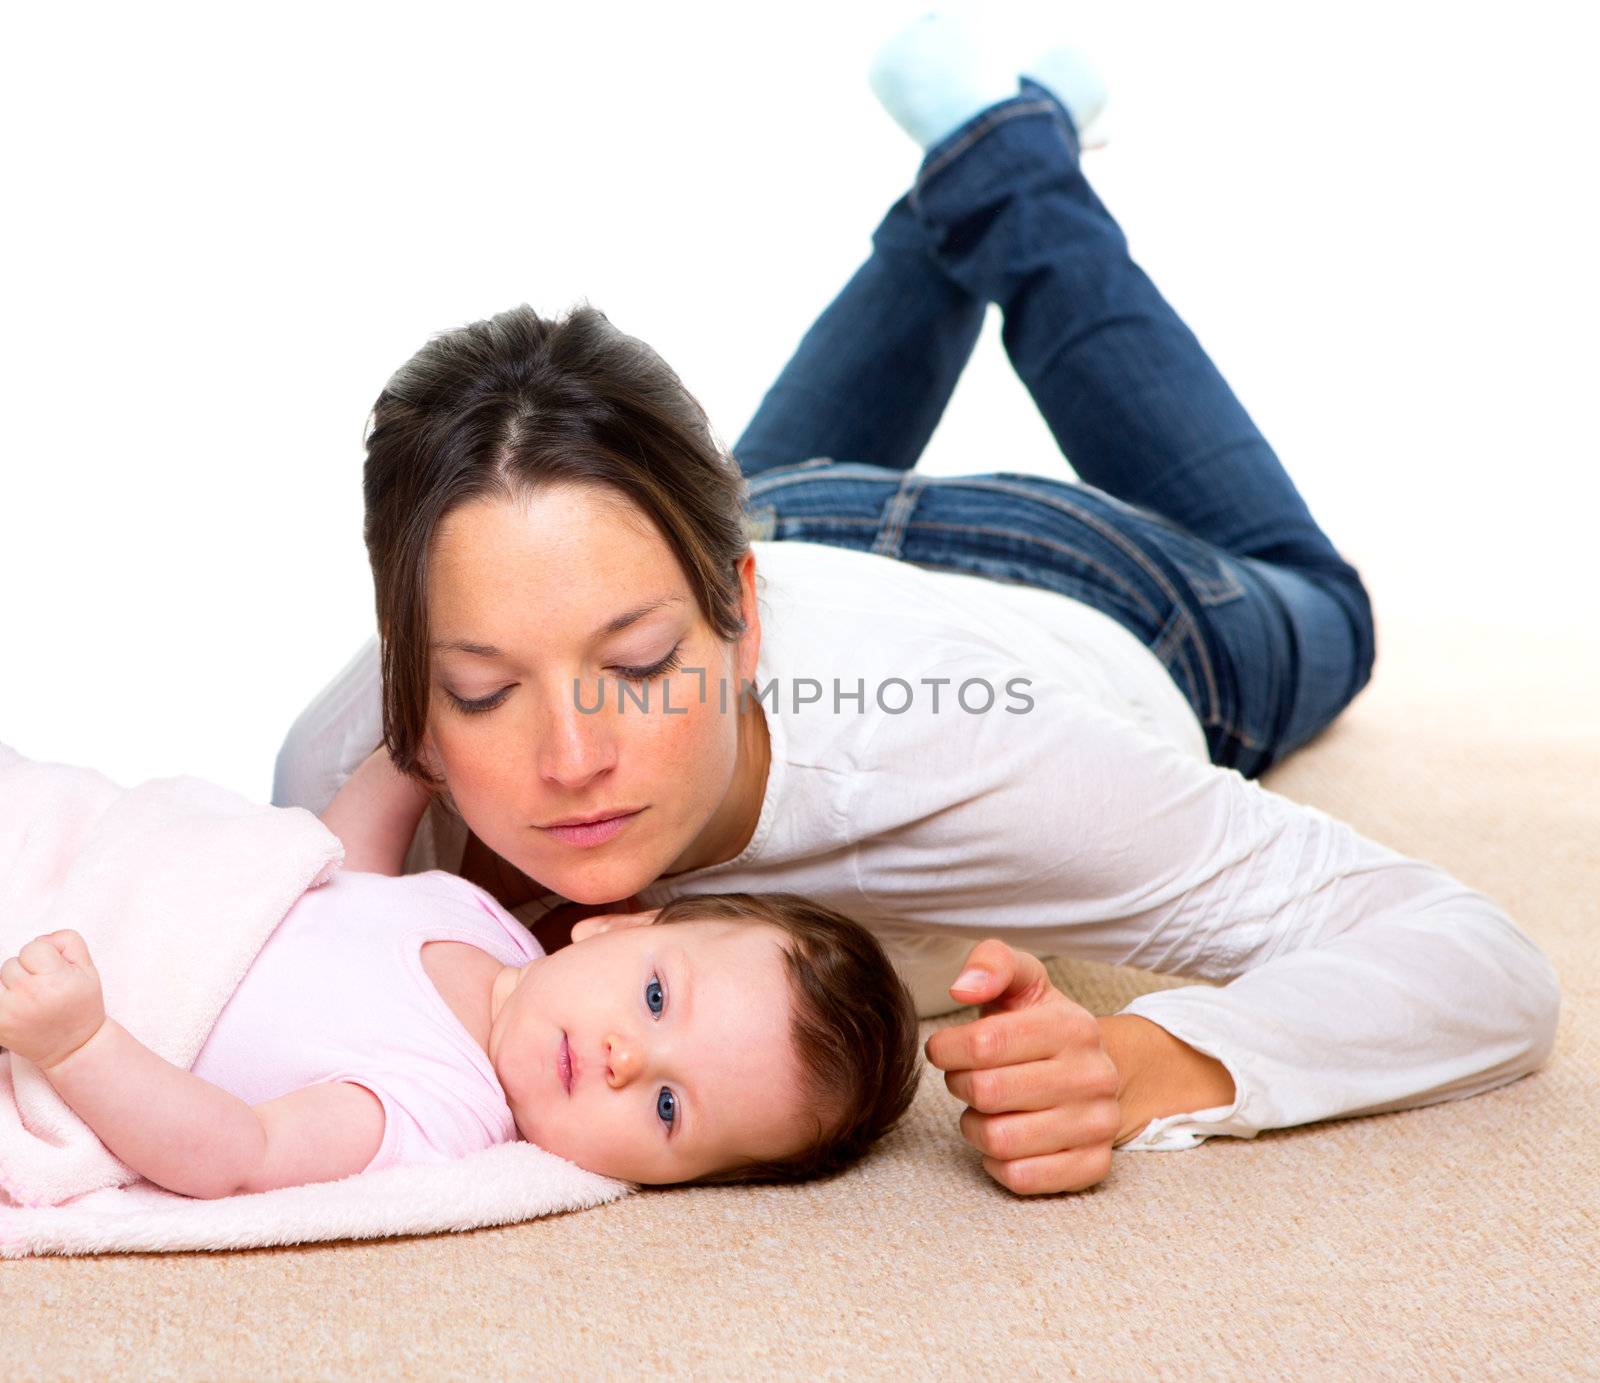 Baby and mother lying on beige carpet together and white background